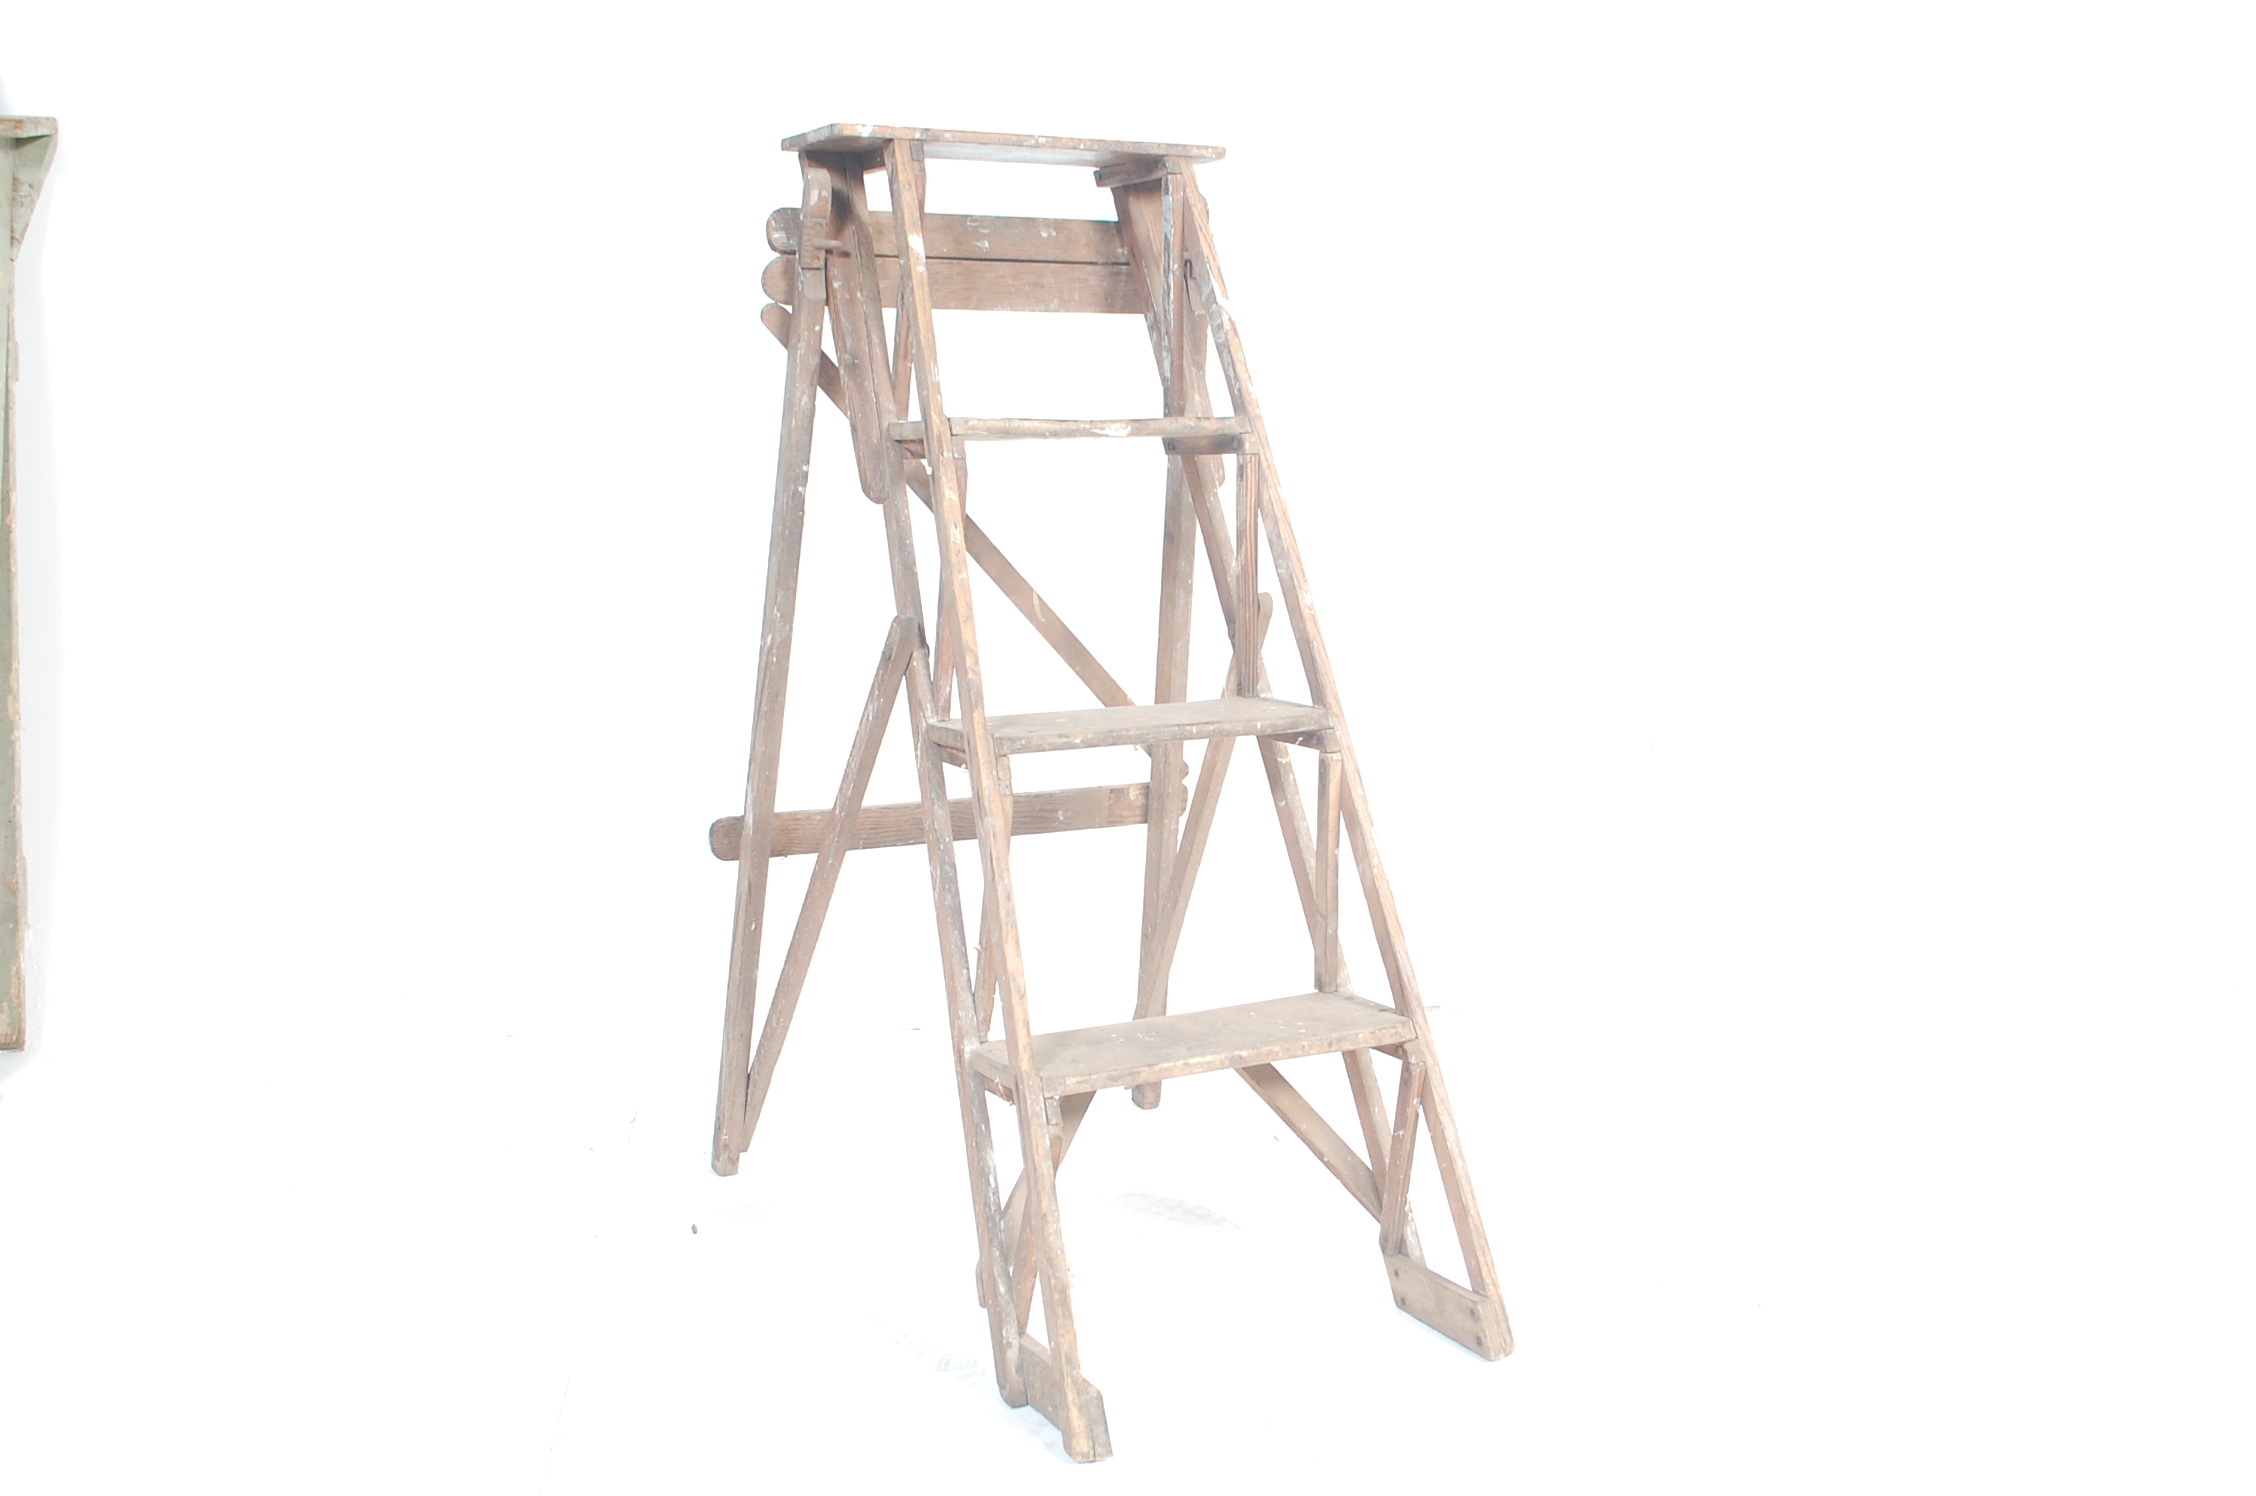 TWO MID 20TH CENTURY VINTAGE RETRO A-FRAME STEP LADDER